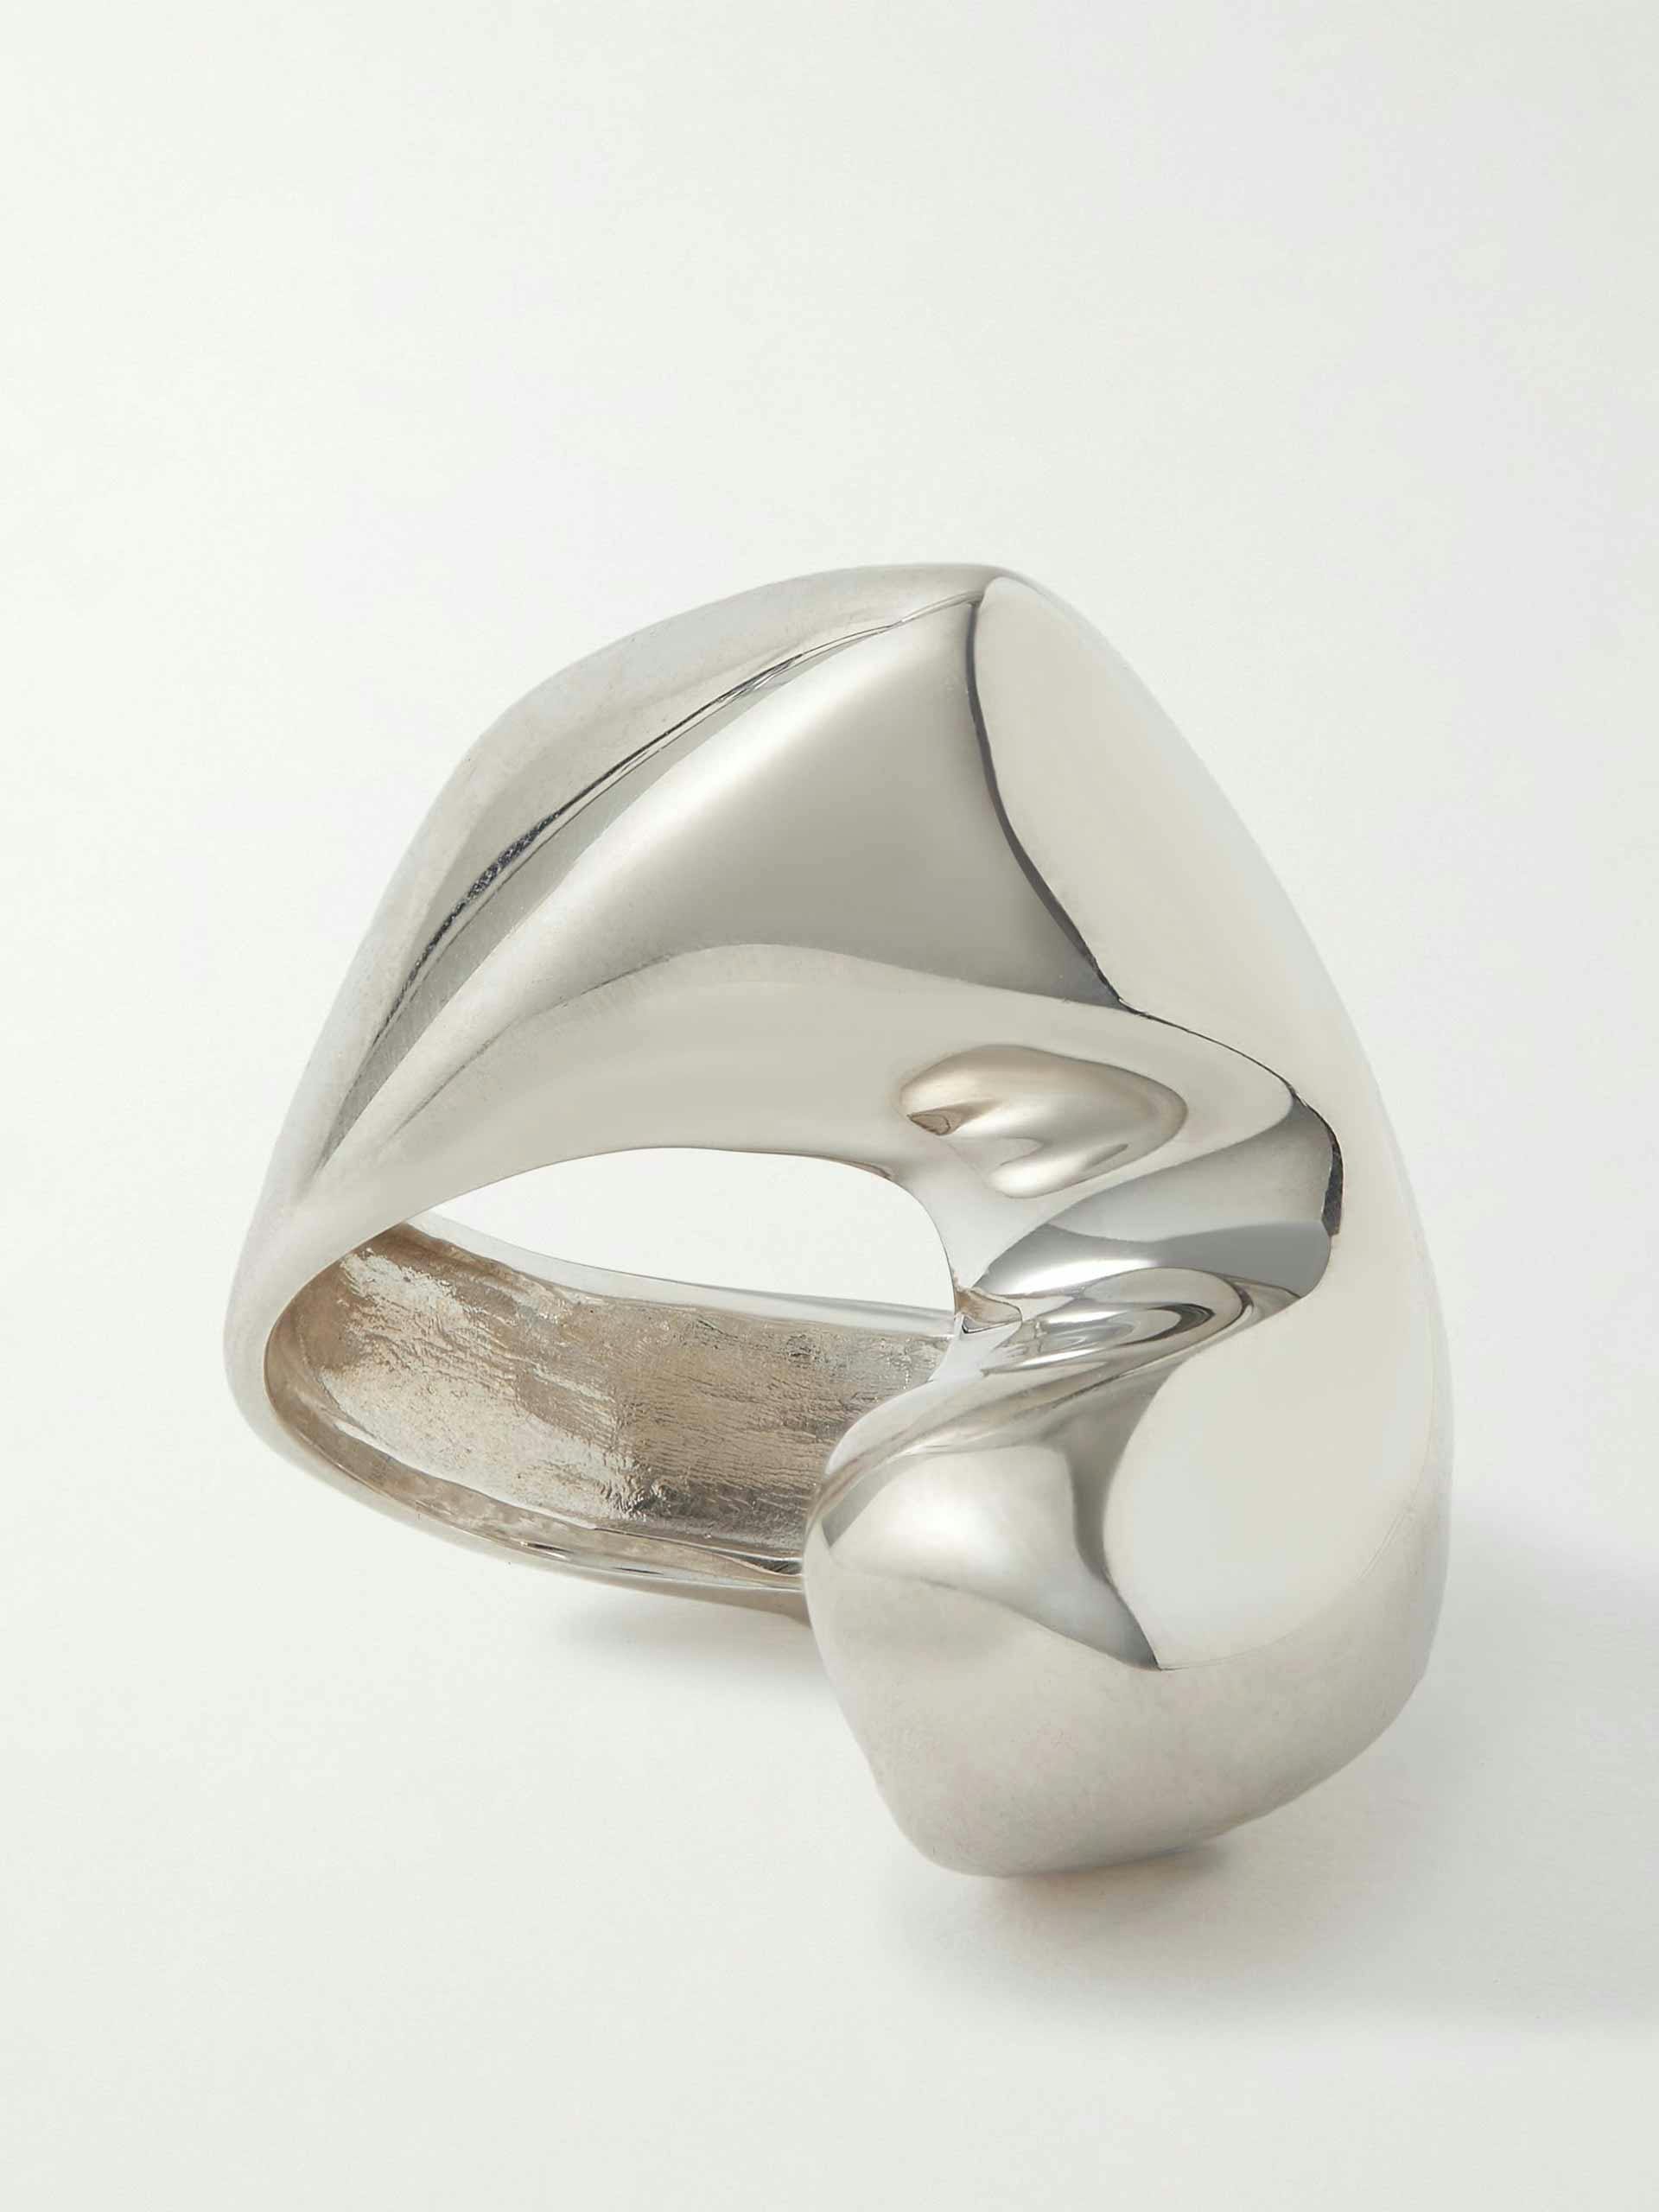 Recycled silver ring